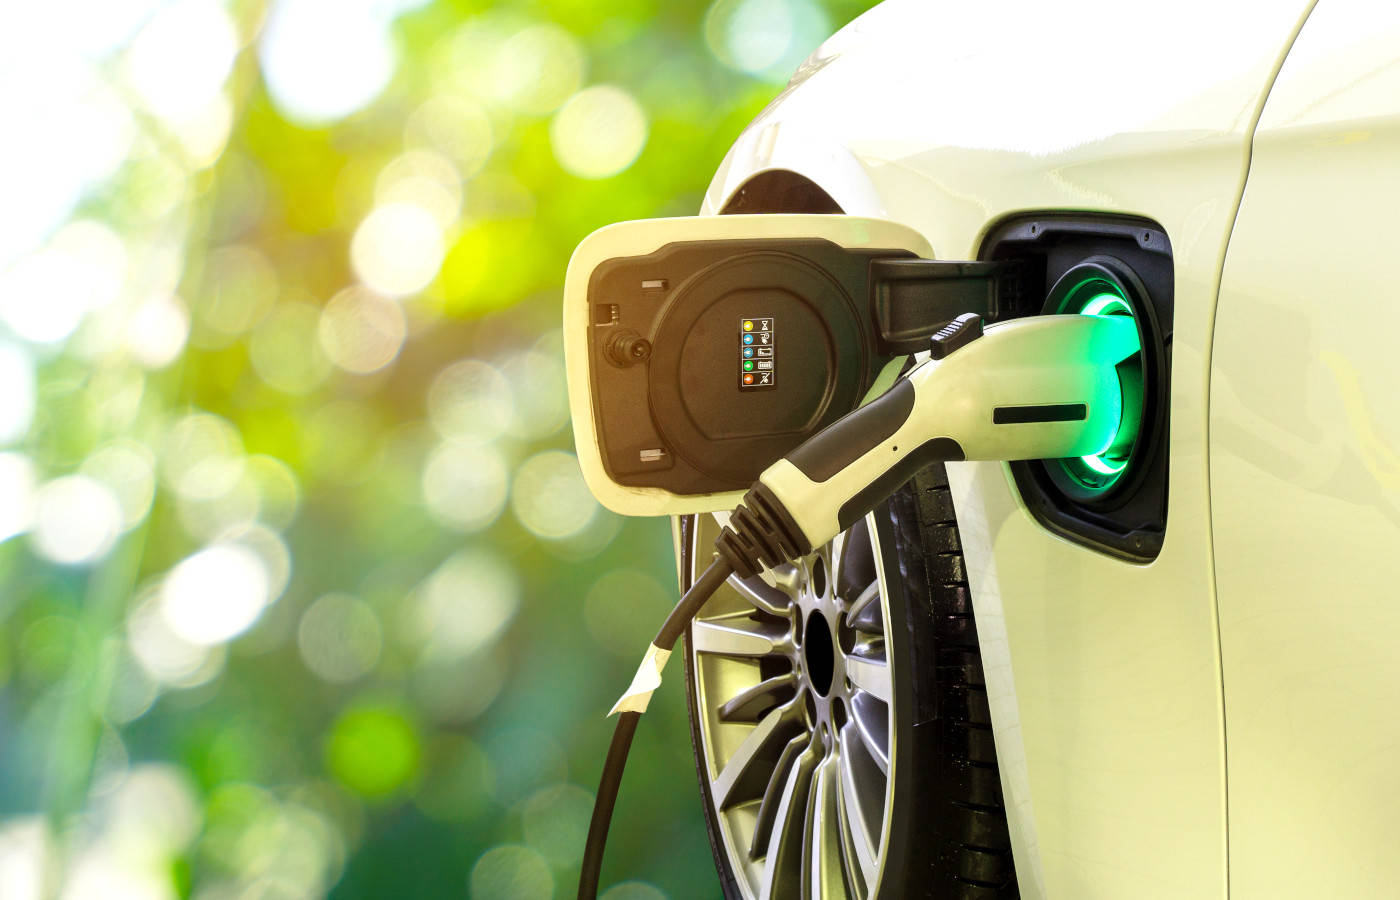 Sustainable mobility with e-car